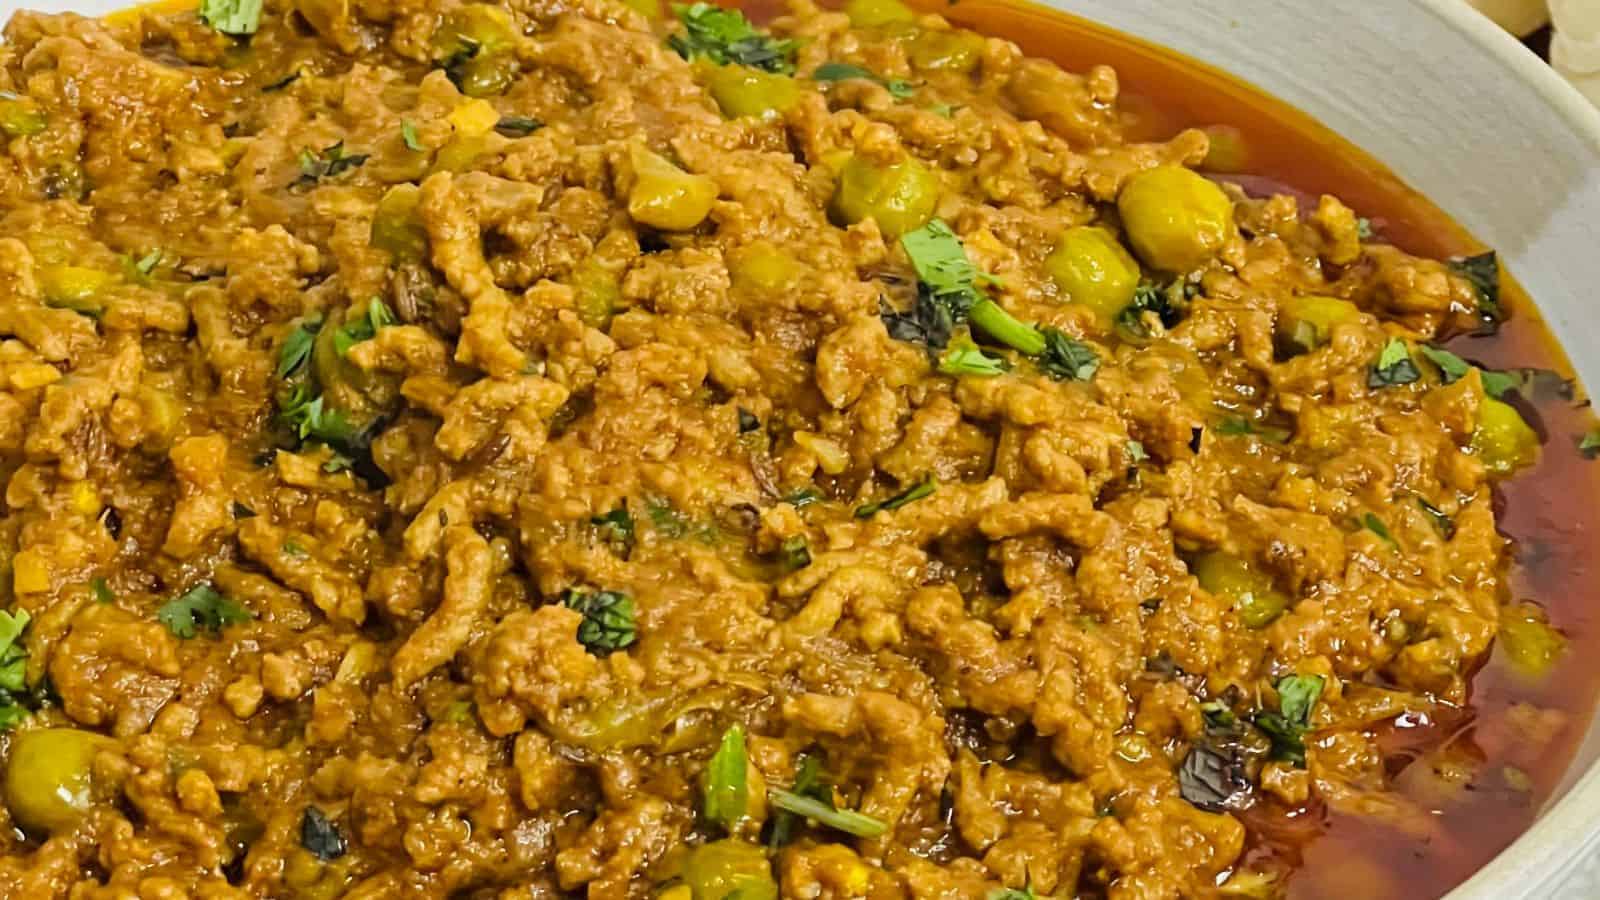 <p>Craving something hearty and flavorful? Look no further than Keema Matar—a classic Indian dish that’s guaranteed to satisfy your hunger pangs. Whether you’re cooking for yourself or entertaining guests, it’s a versatile option that never disappoints. Treat yourself to a bowl of this comforting goodness and savor the essence of Indian cuisine. <br><strong>Get the Recipe: </strong><a href="https://easyindiancookbook.com/keema-matar/?utm_source=msn&utm_medium=page&utm_campaign=Omg!%2017%20indian%20dishes%20that%20will%20blow%20your%20mind">Keema Matar</a></p>